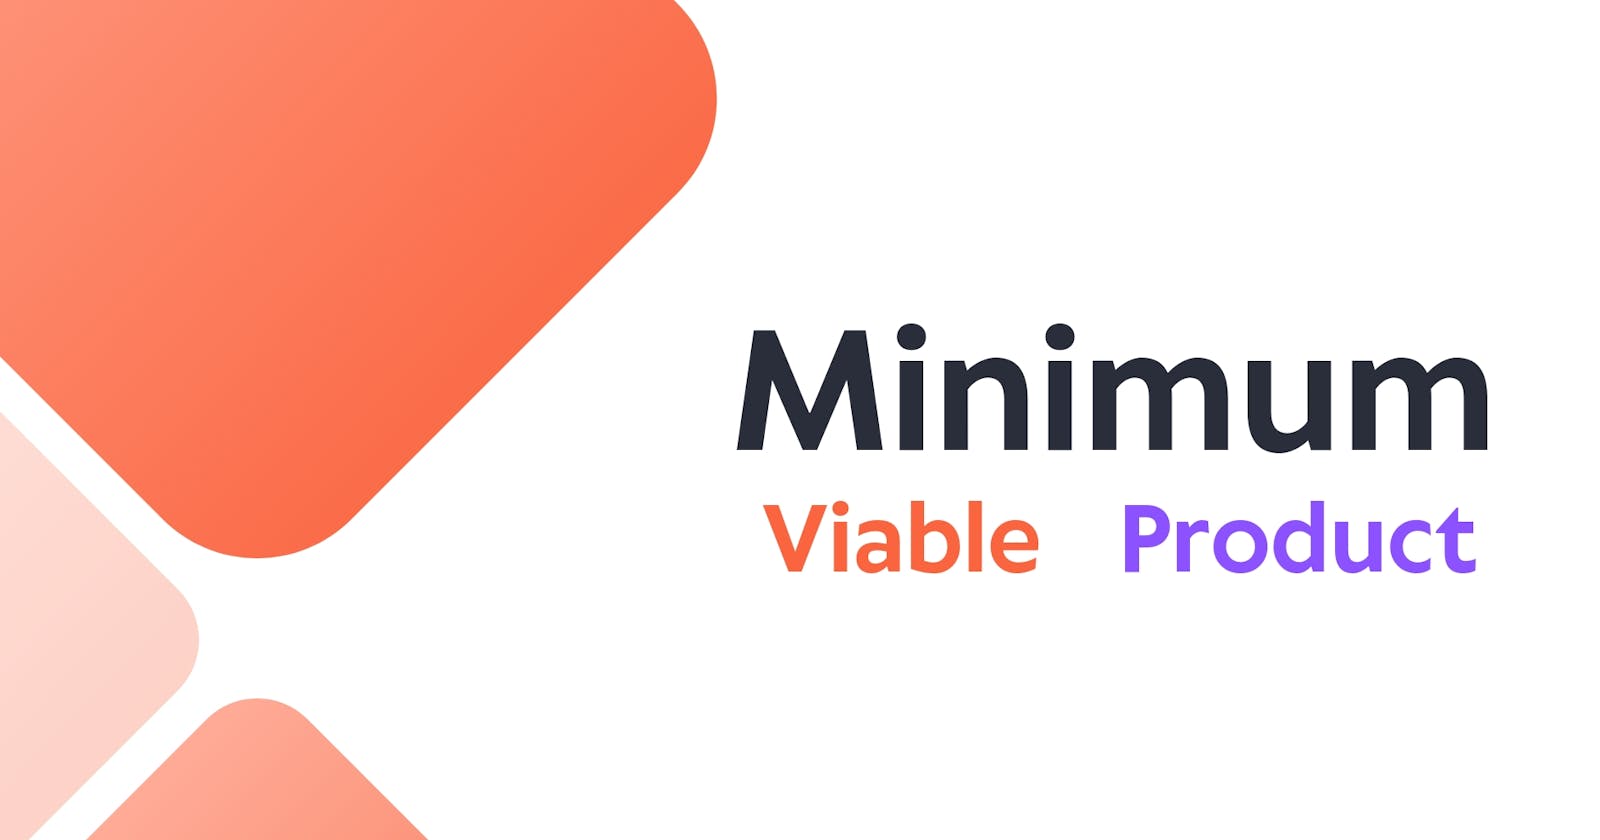 What's a Minimum Viable Product (MVP) and Why Does It Matter?